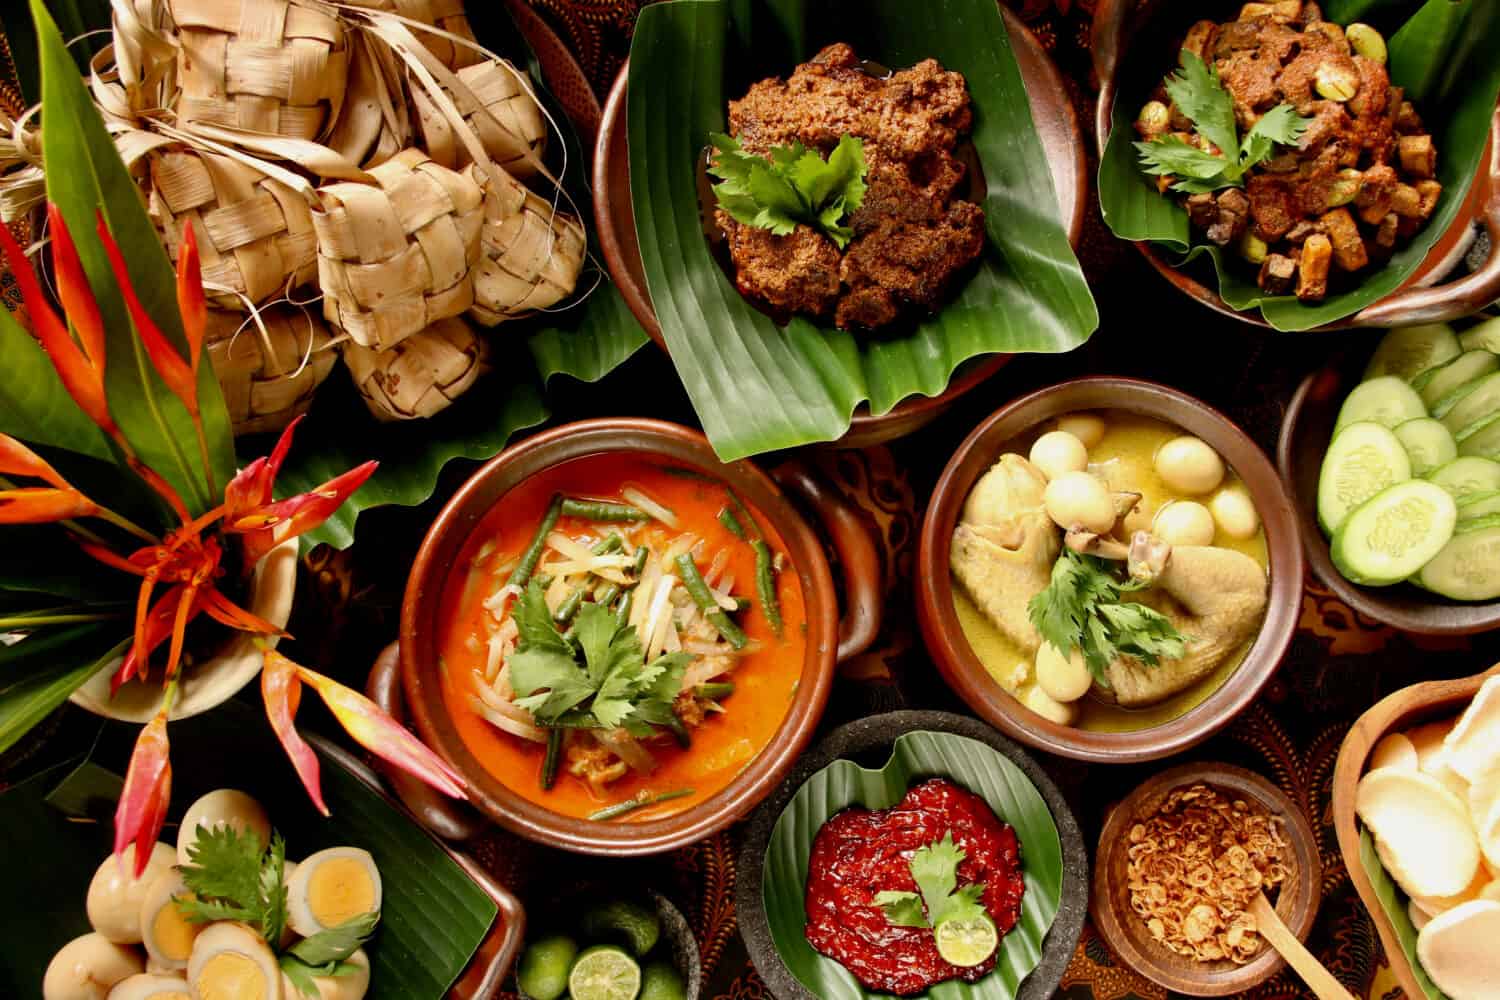 Ketupat Lebaran. Traditional celebratory dish of rice cake with several side dishes, popularly served during Eid celebrations.